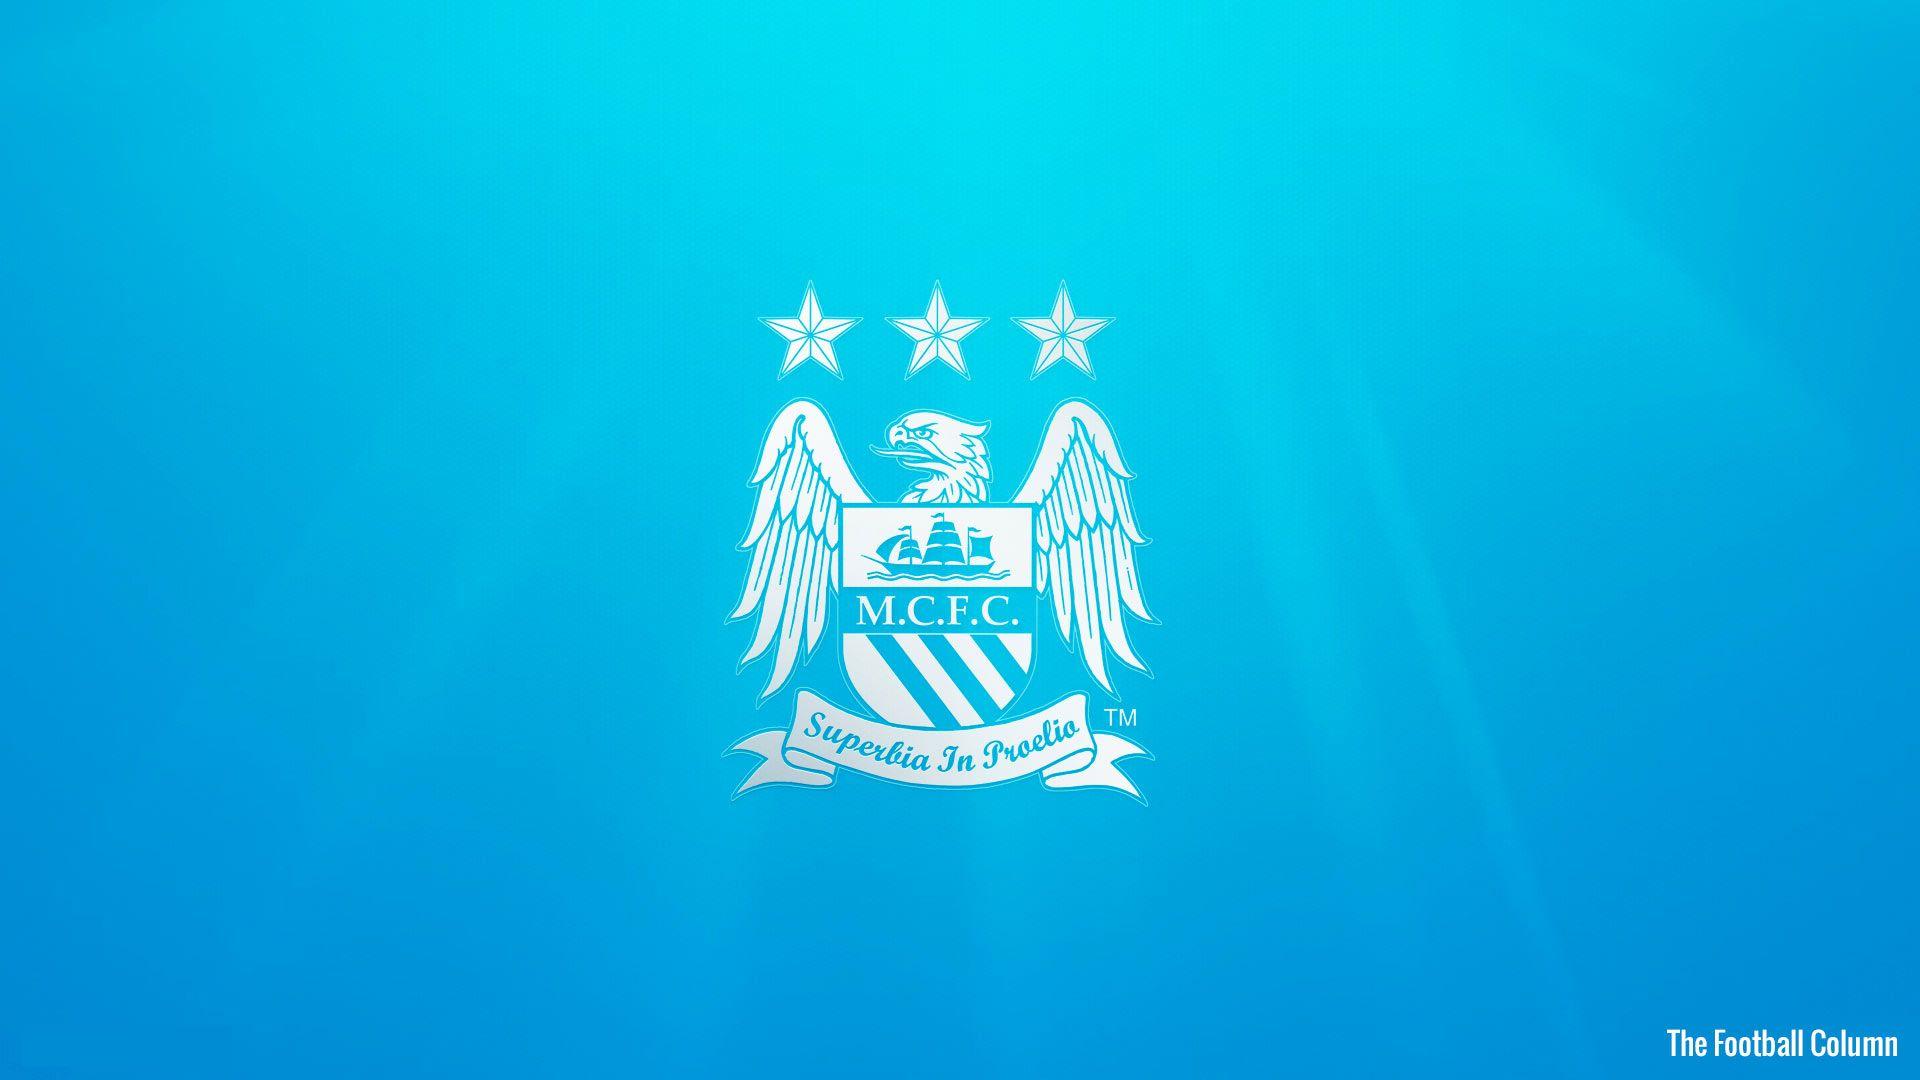 Manchester City Club Image wallpaper